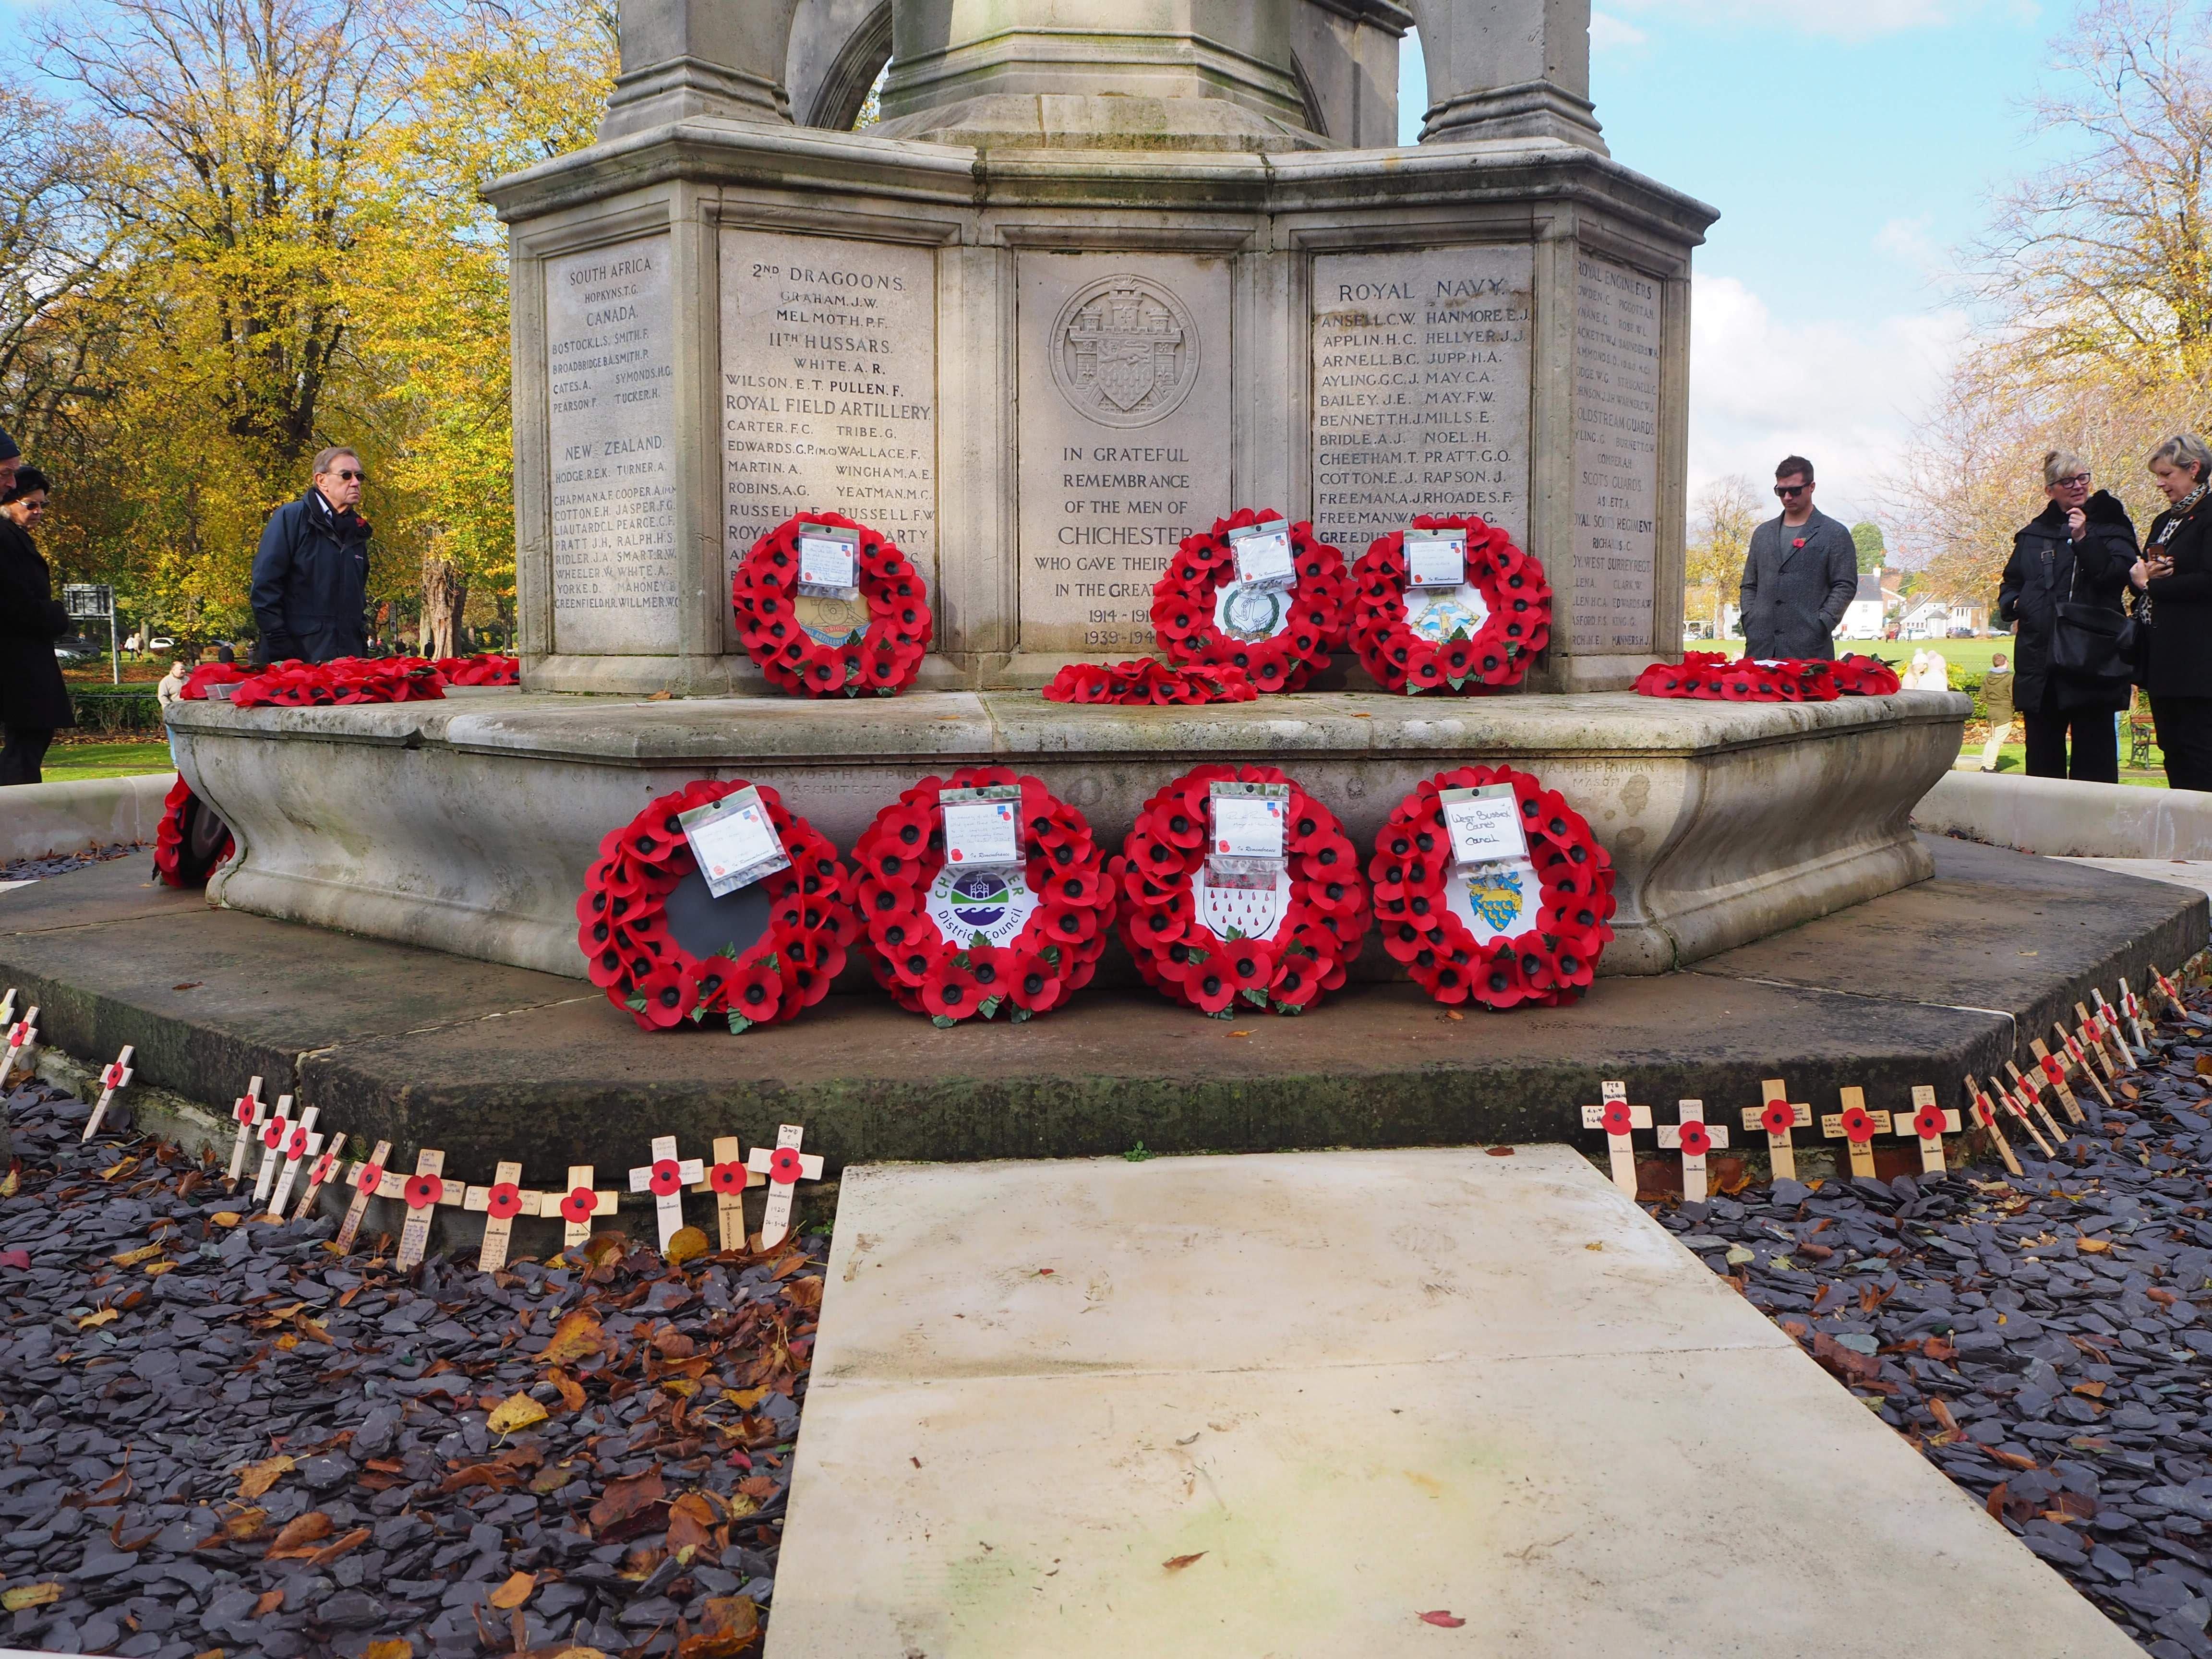 Wreaths were laid at the memorial